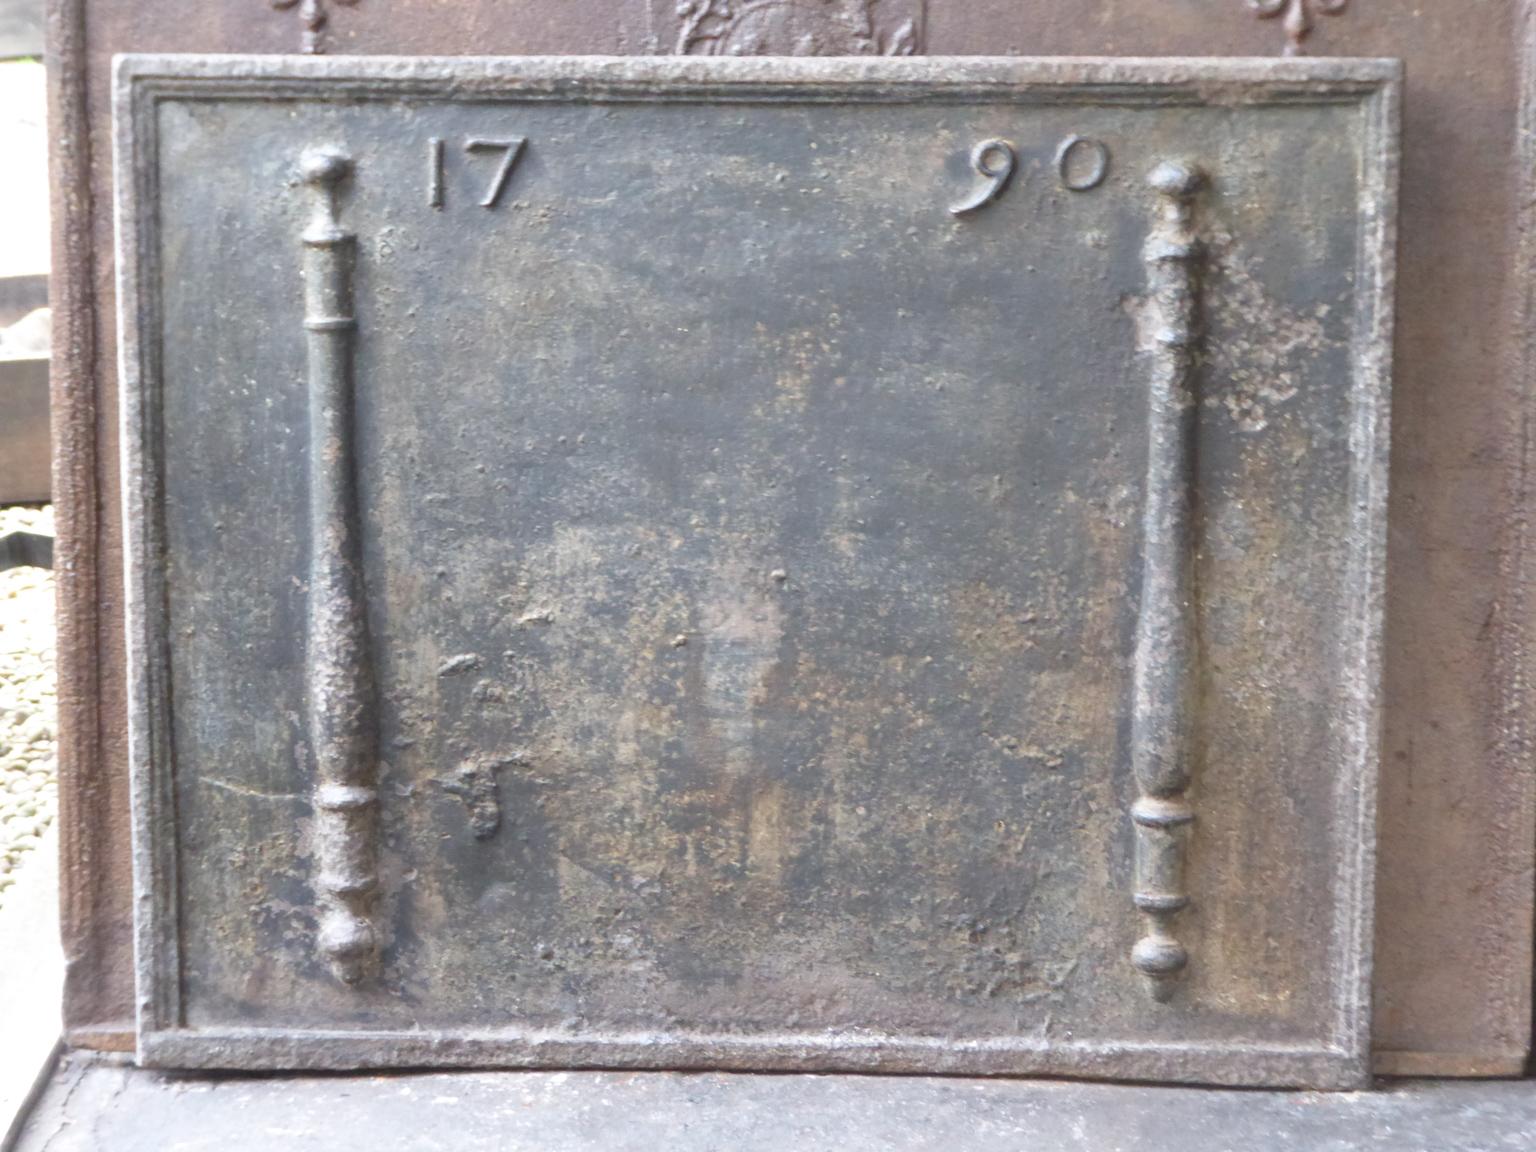 18th century French Louis XV fireback. The date of production, 1790, is cast in the fireback. The pillars refer to the club of Hercules and symbolize strength and the unknown.

The fireback is made of cast iron and has a natural brown patina. Upon